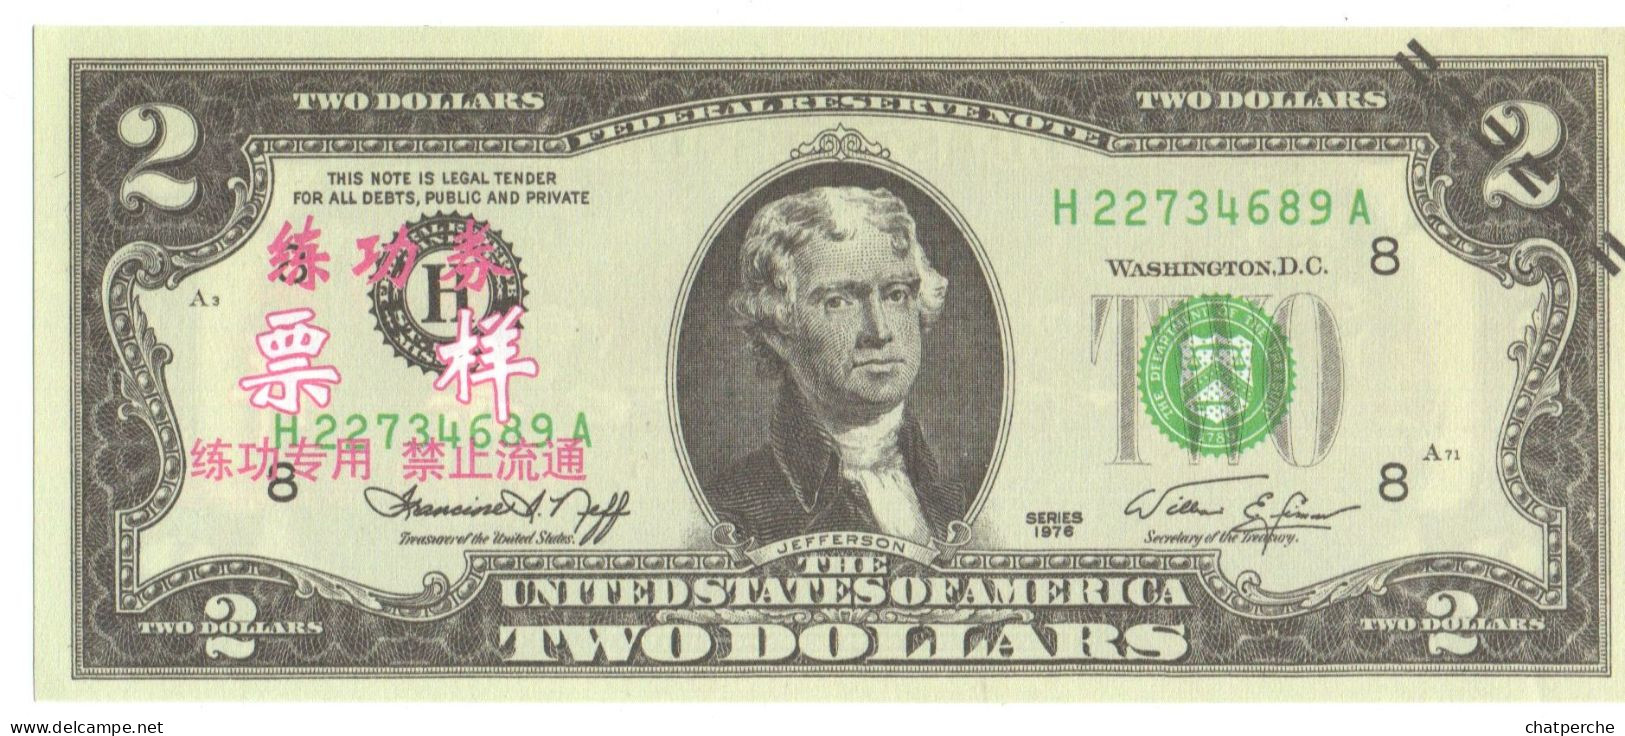 POUR COLLECTIONNEUR FAUX-BILLET FAKE 2 TWO DOLLARS THOMAS JEFFERSON USA THE UNITED STATES OF AMERICA - Abarten